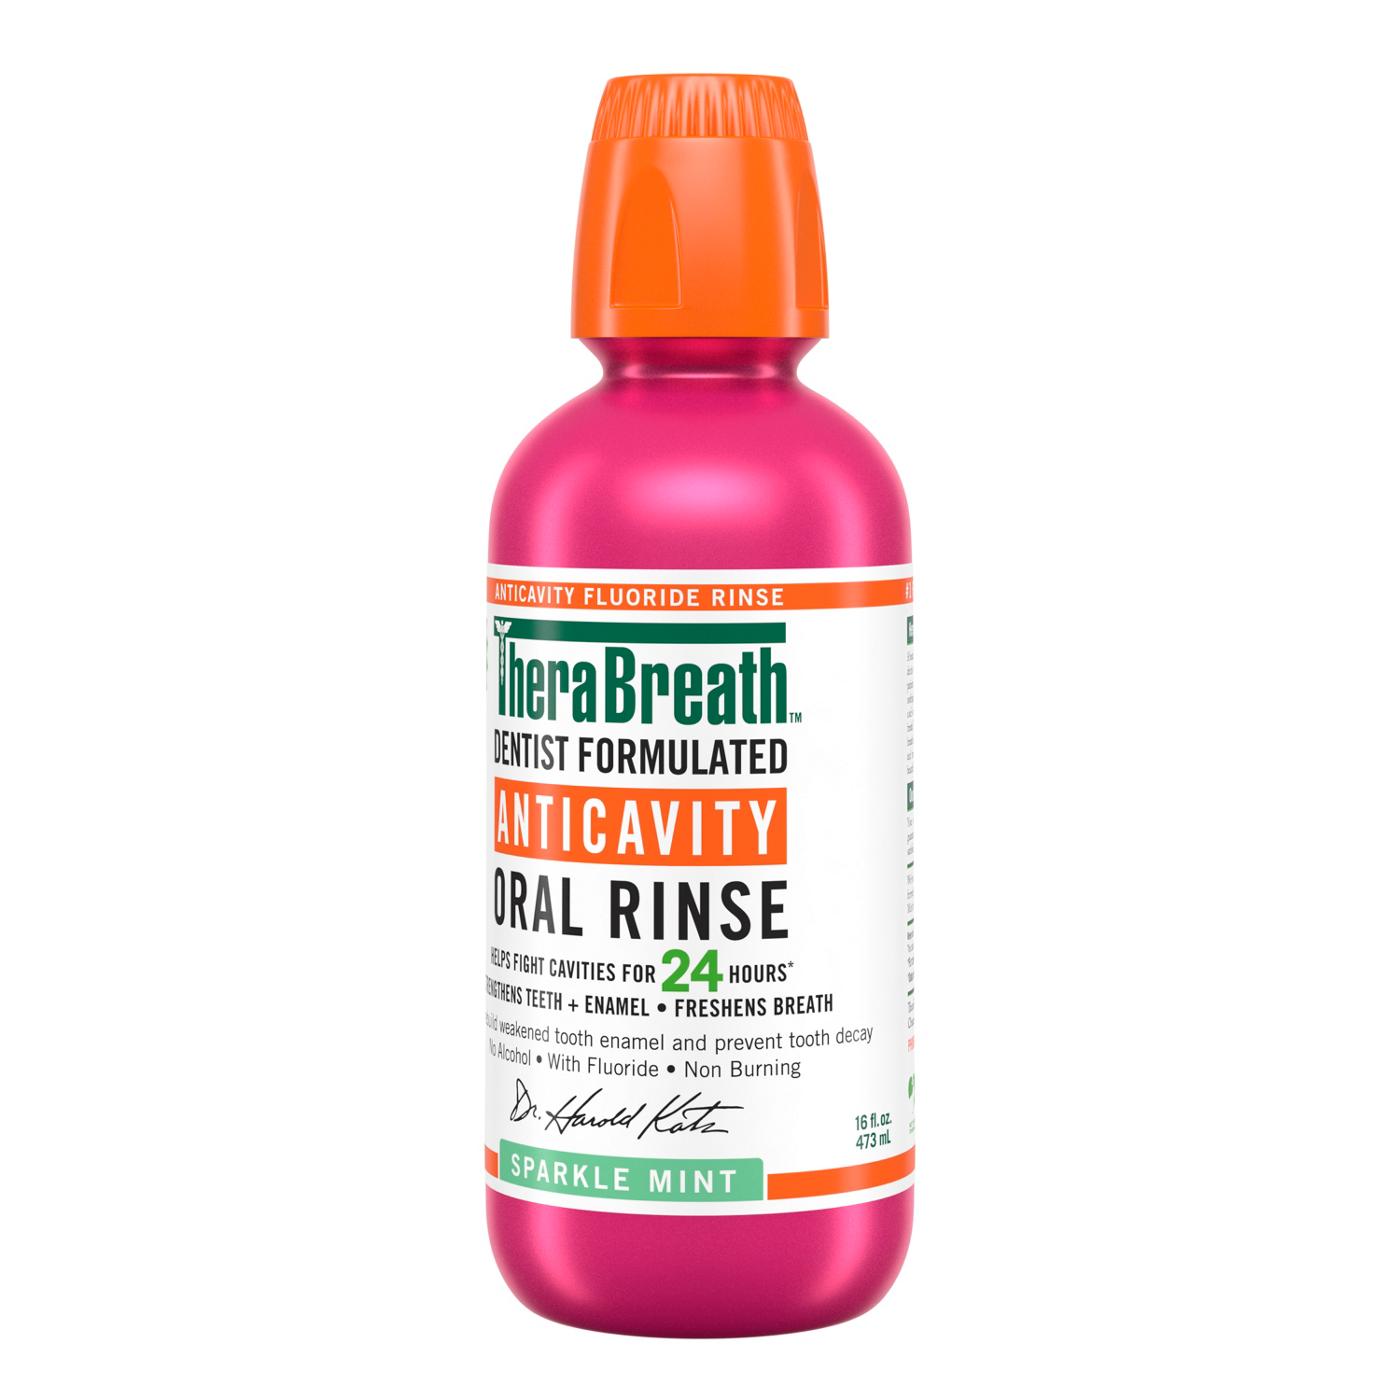 TheraBreath Anticavity Fluoride Mouthwash - Sparkle Mint; image 4 of 5